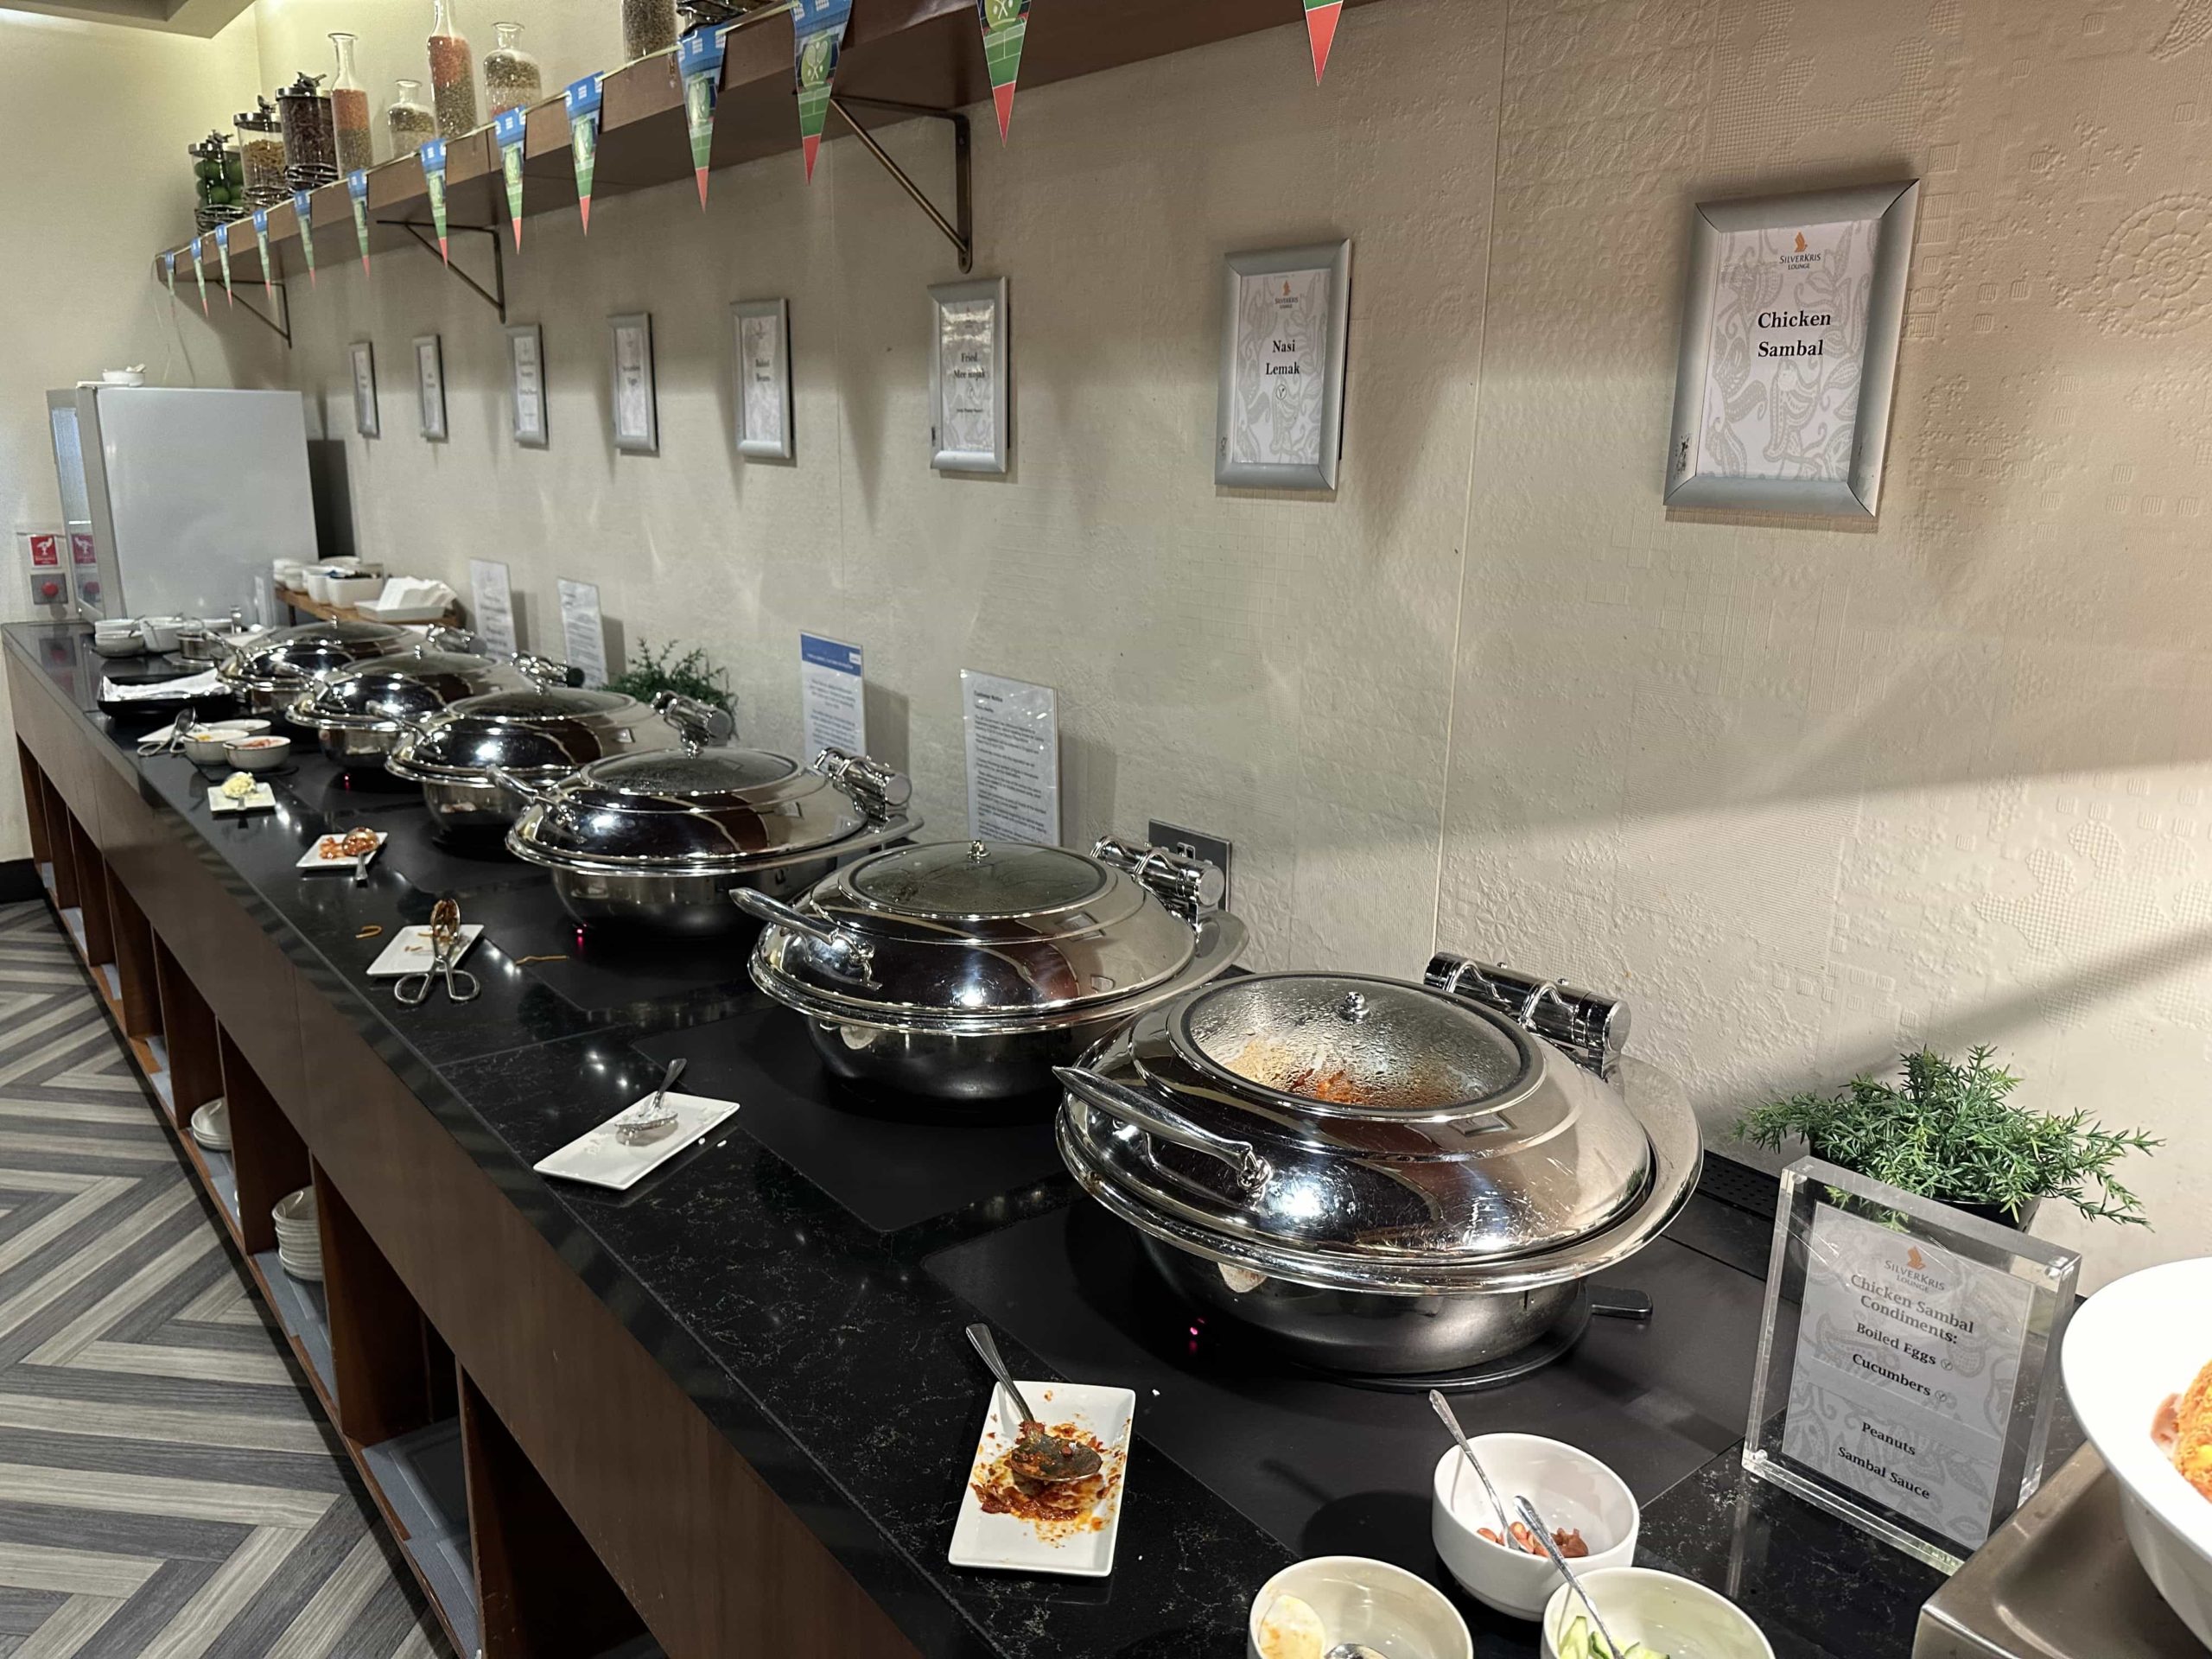 6 chafing dishes from which hot dishes are served